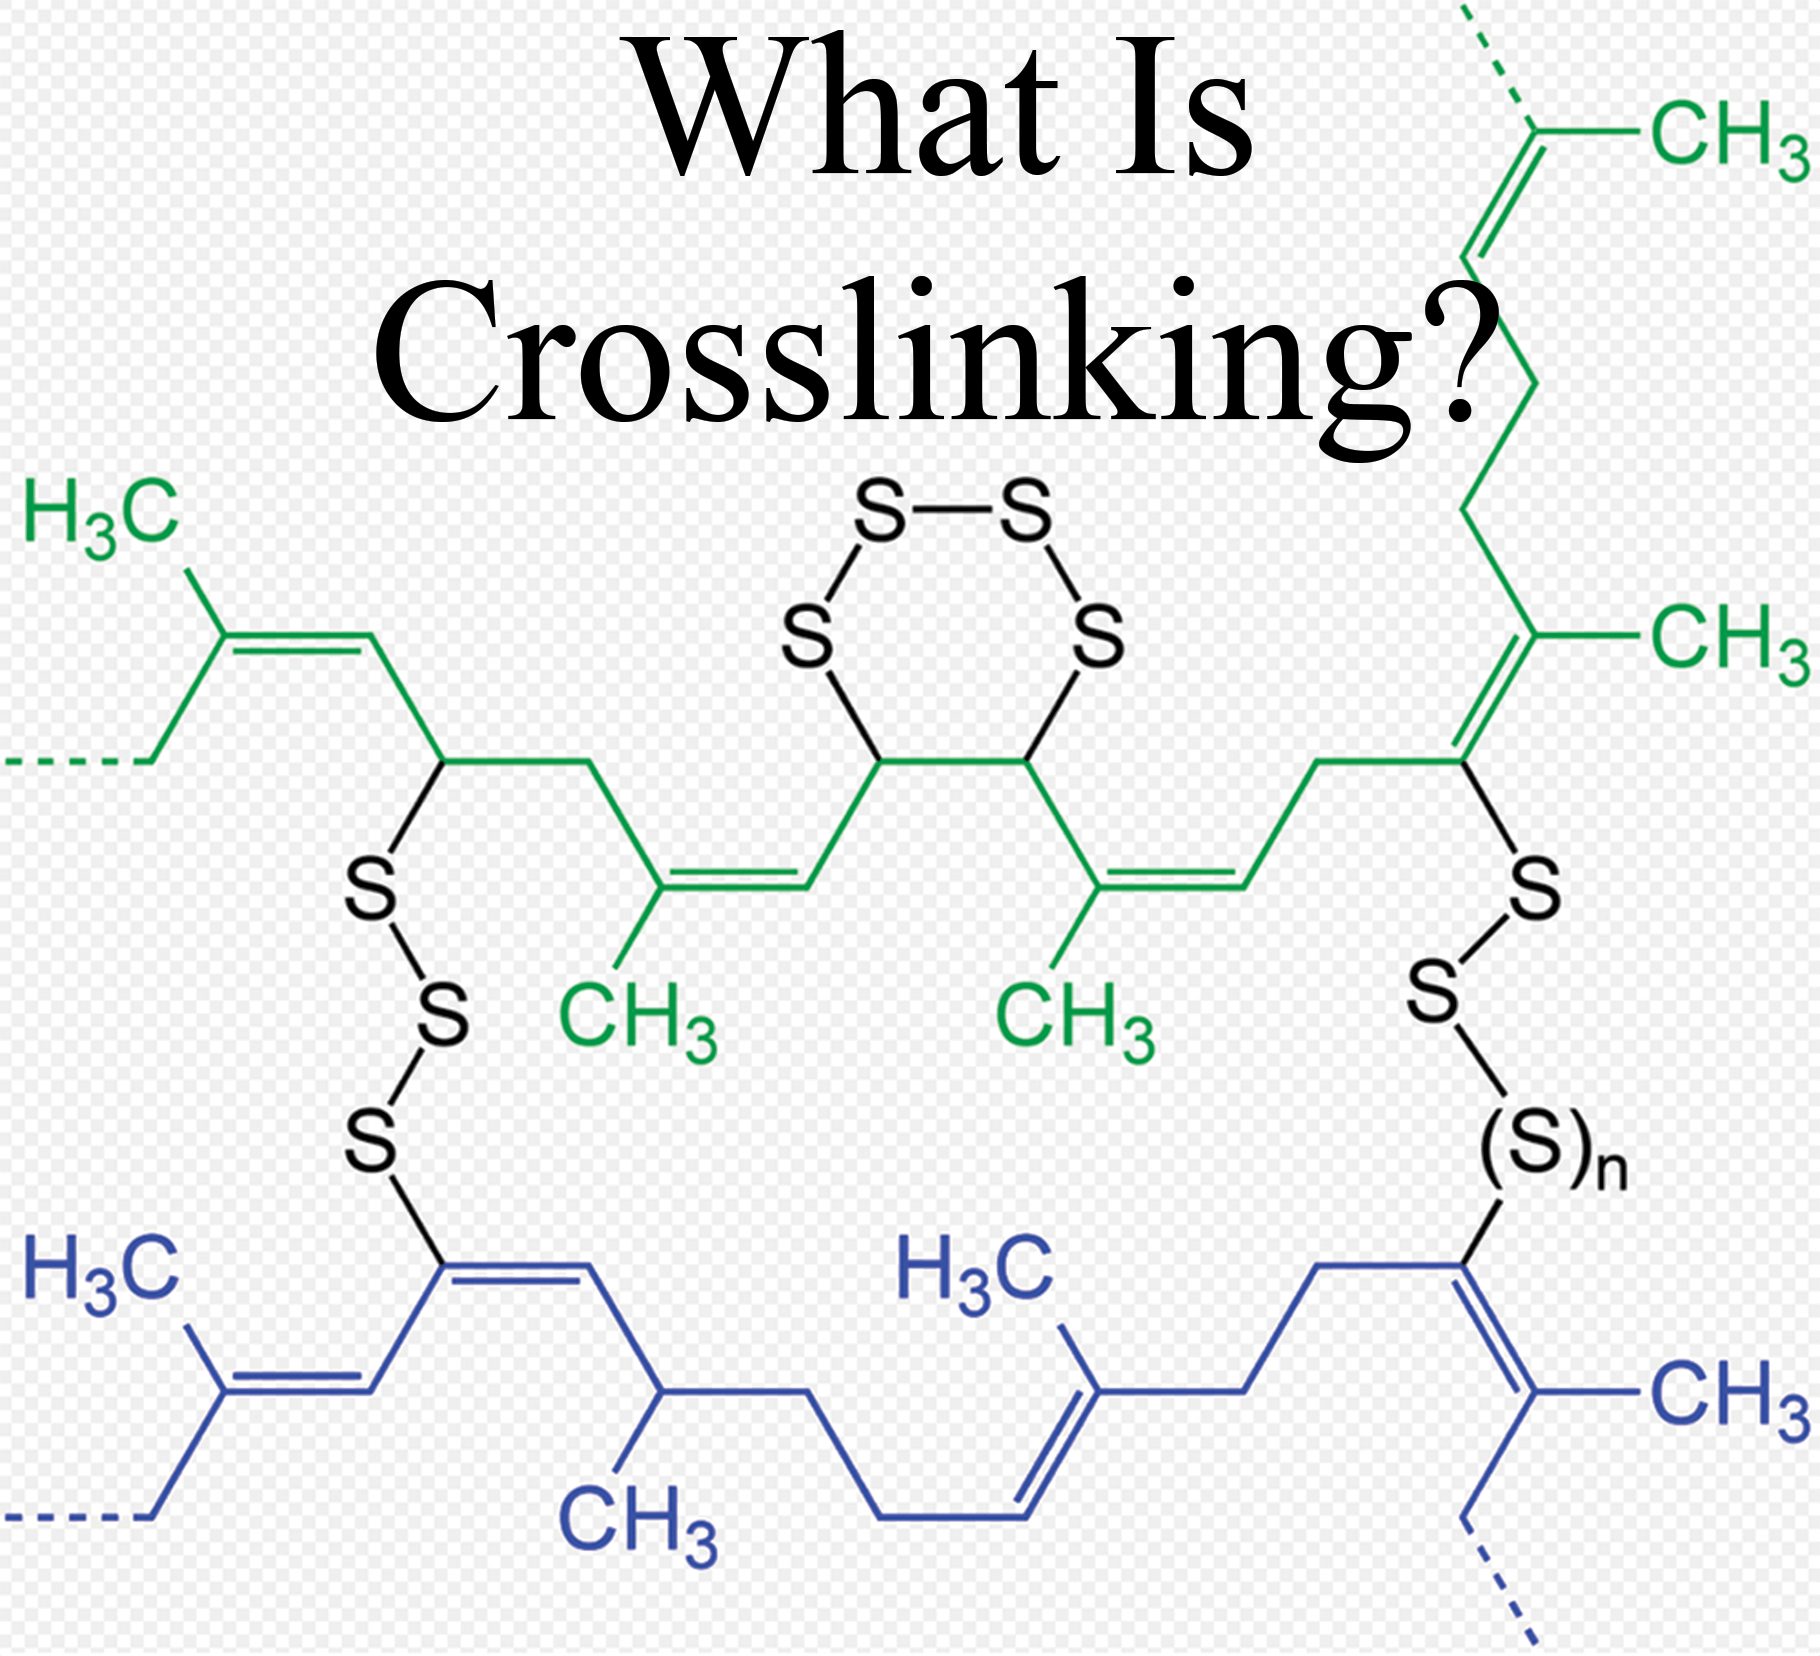 What is Wire & Cable Crosslinking?